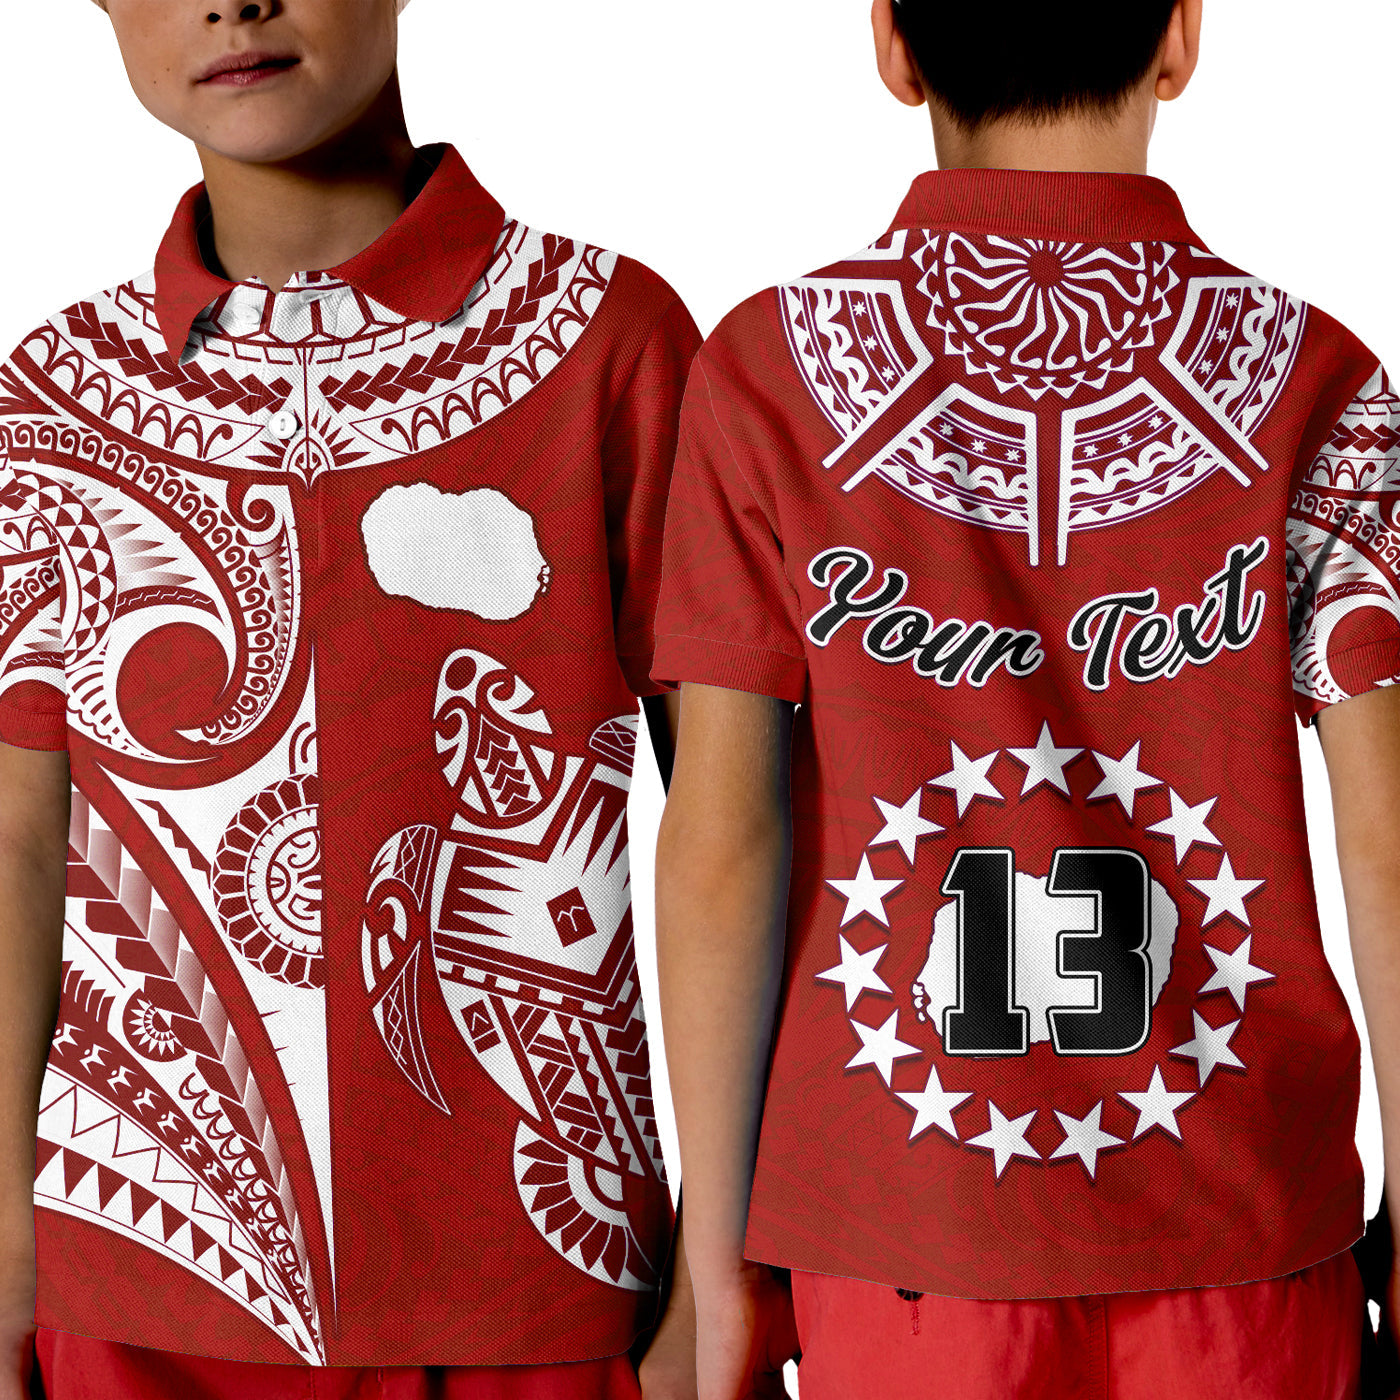 custom-text-and-number-rarotonga-cook-islands-polo-shirt-kid-turtle-and-map-style-red